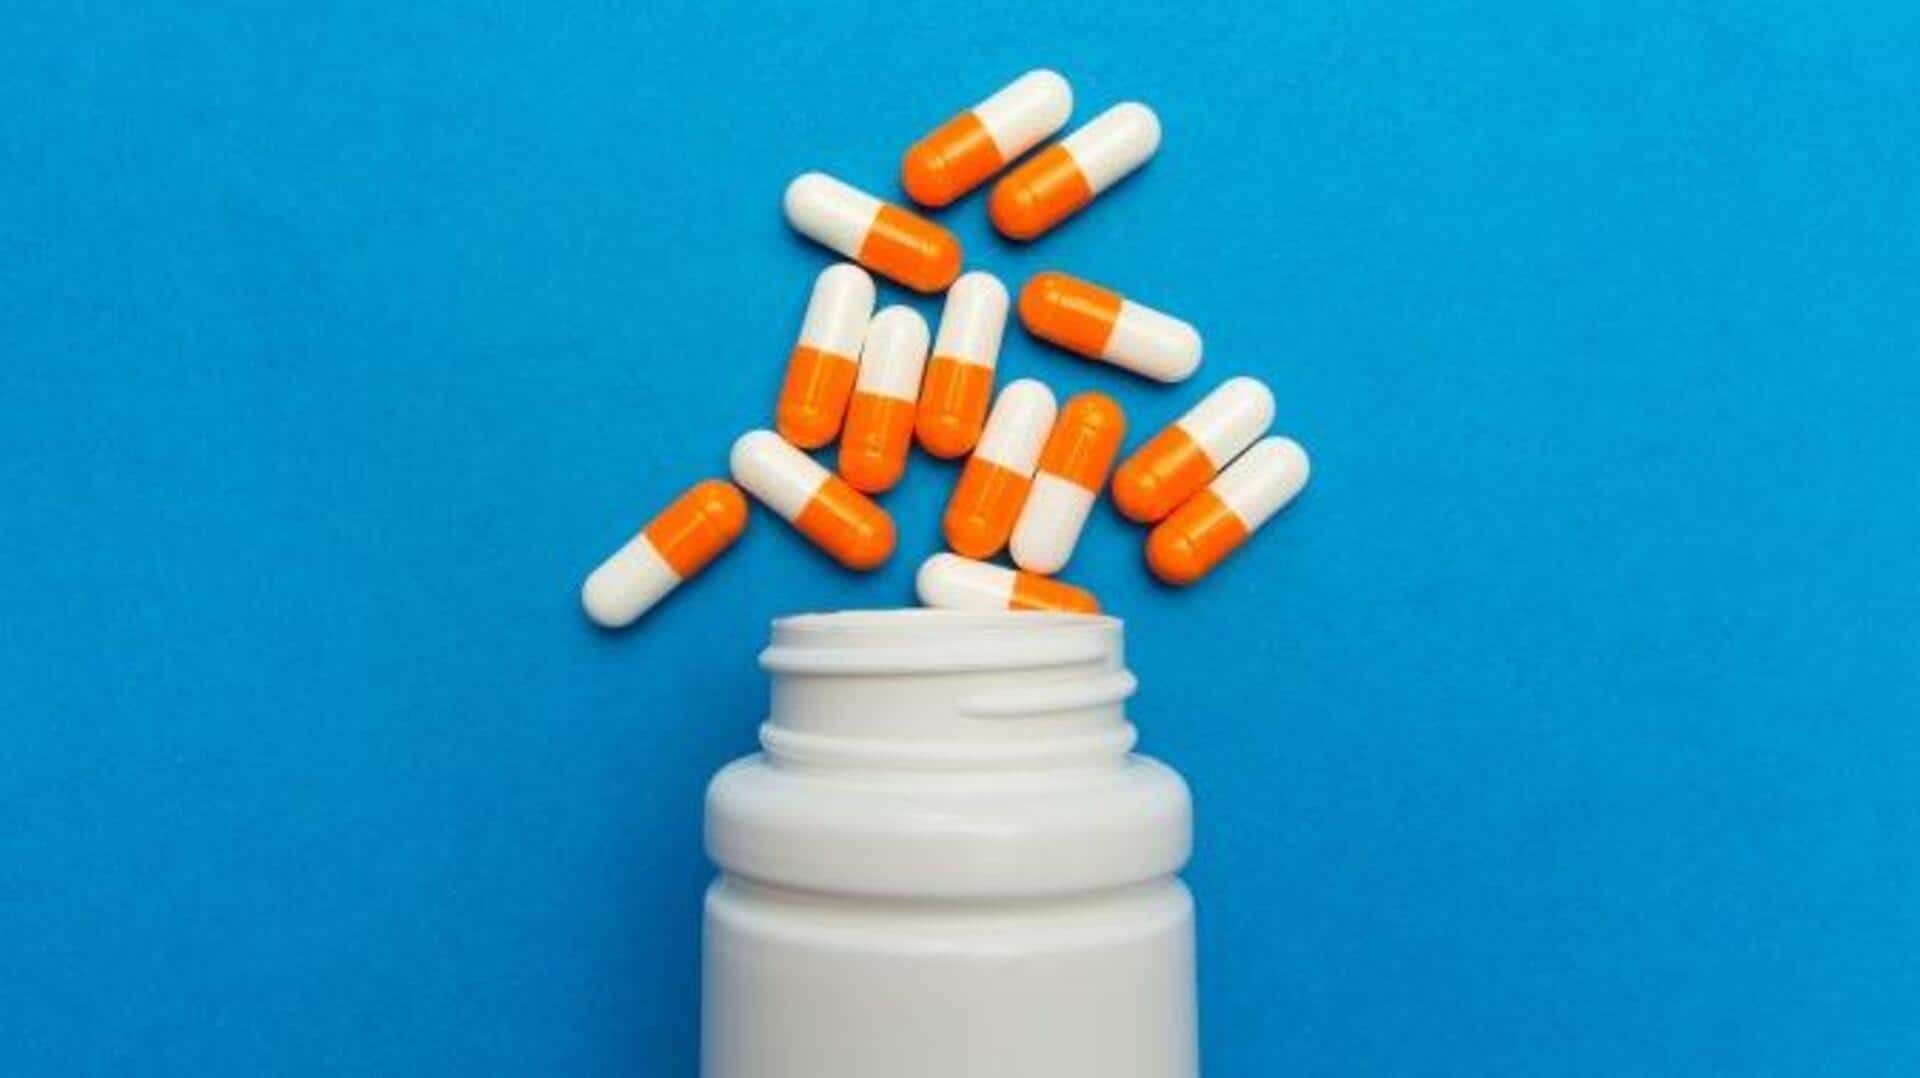 Lupin recalls over 51,000 bottles of antibiotic in the US